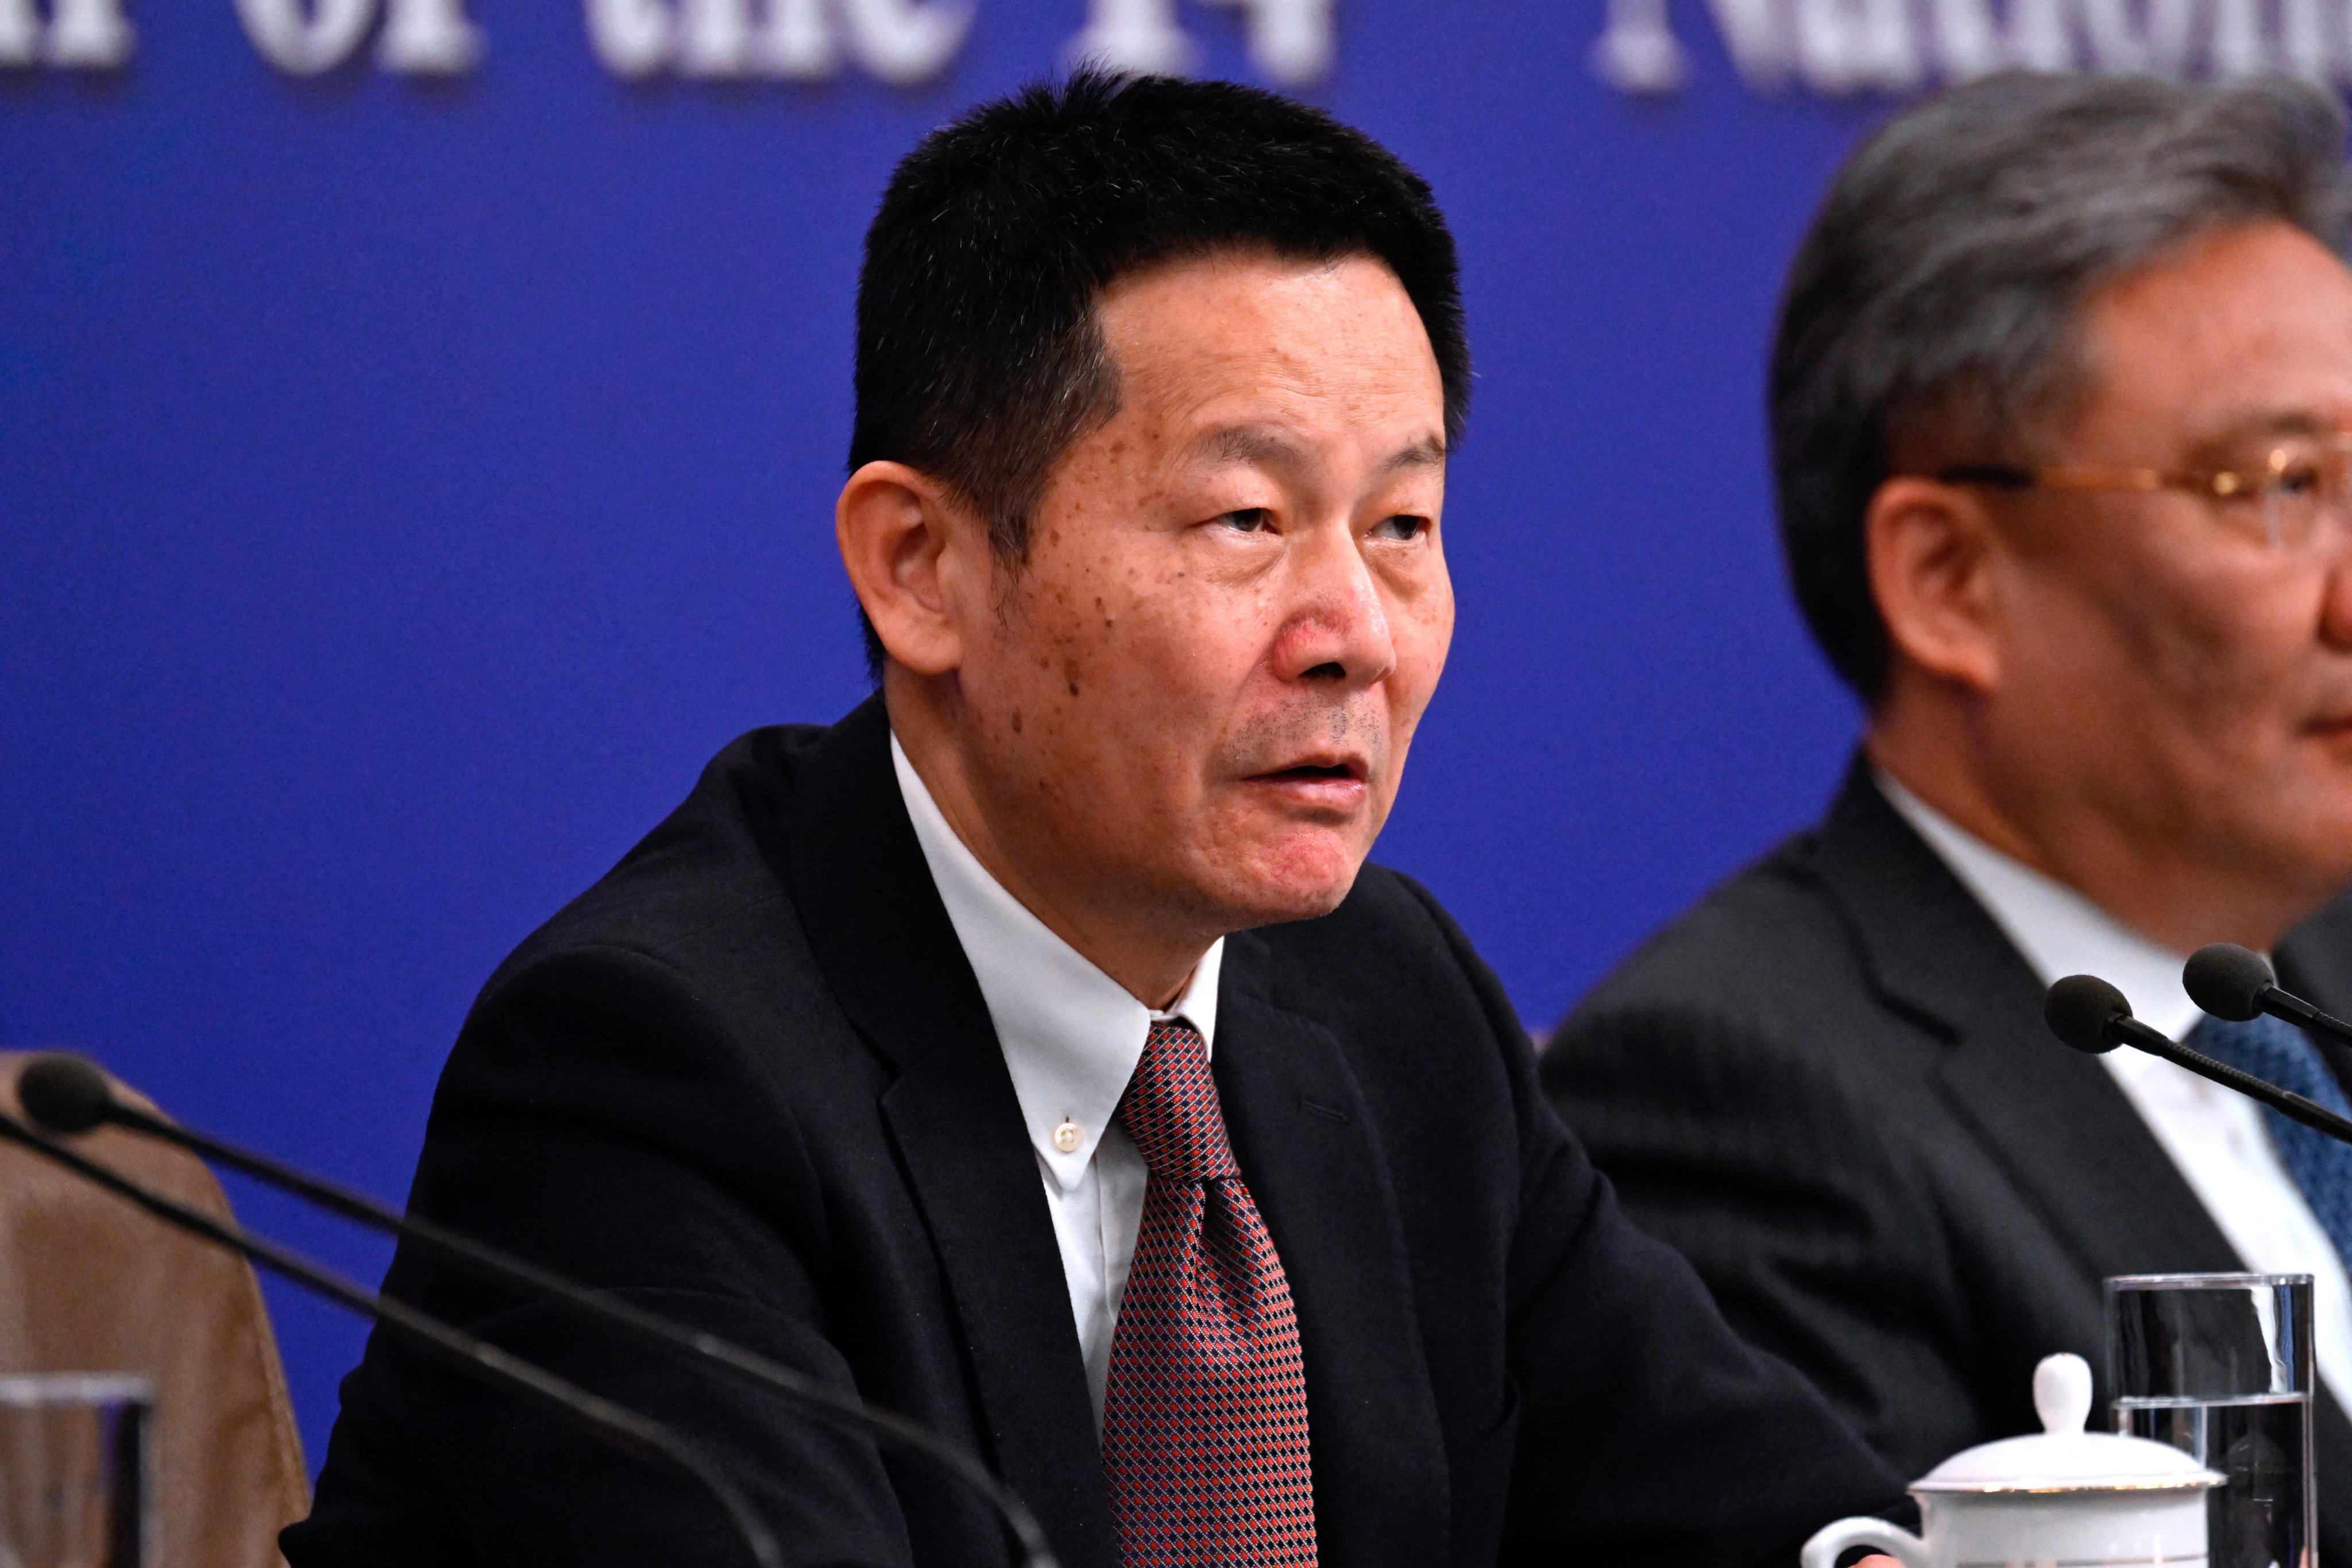 Wu Qing, chairman of the China Securities Regulatory Commission, was appointed to stem a downturn in the country’s capital markets. Photo: AFP